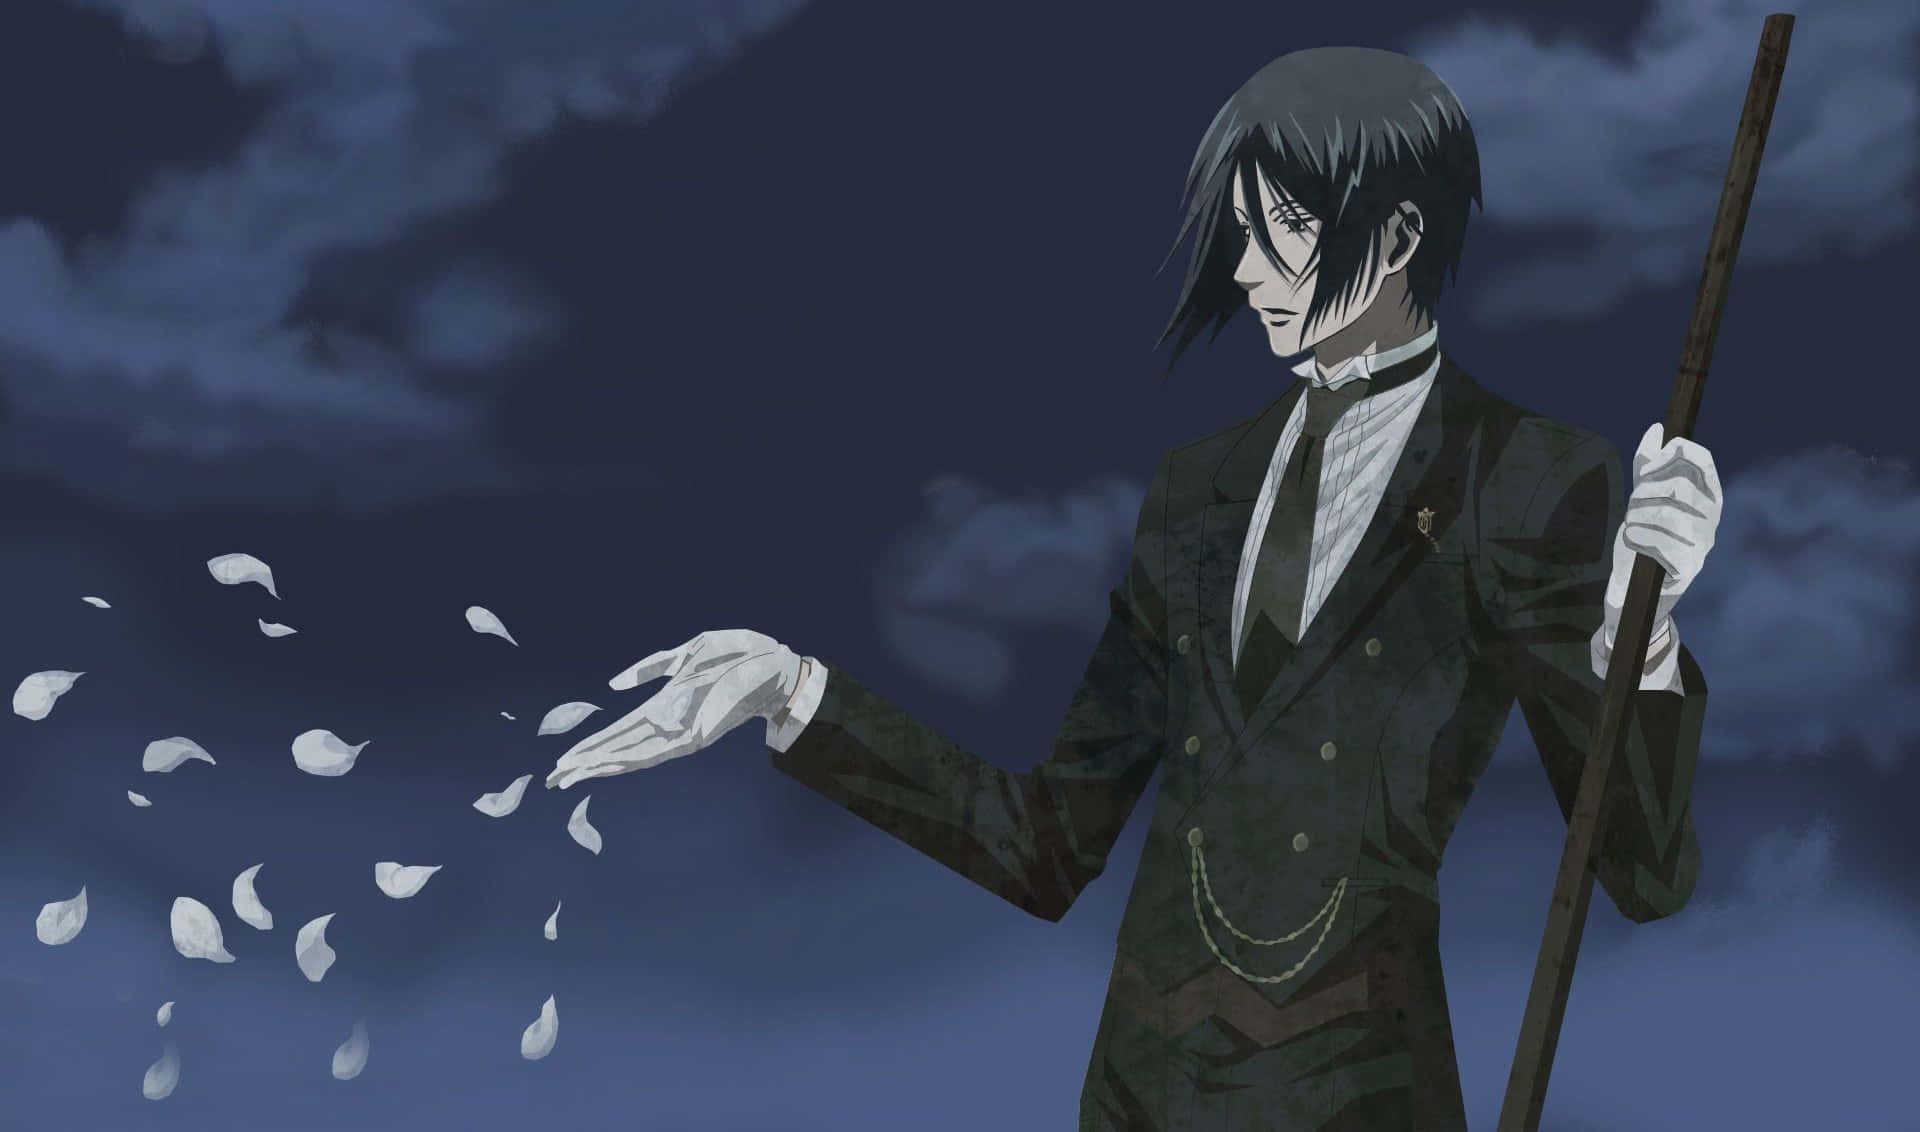 Intrigue and mystery await in the world of Black Butler.